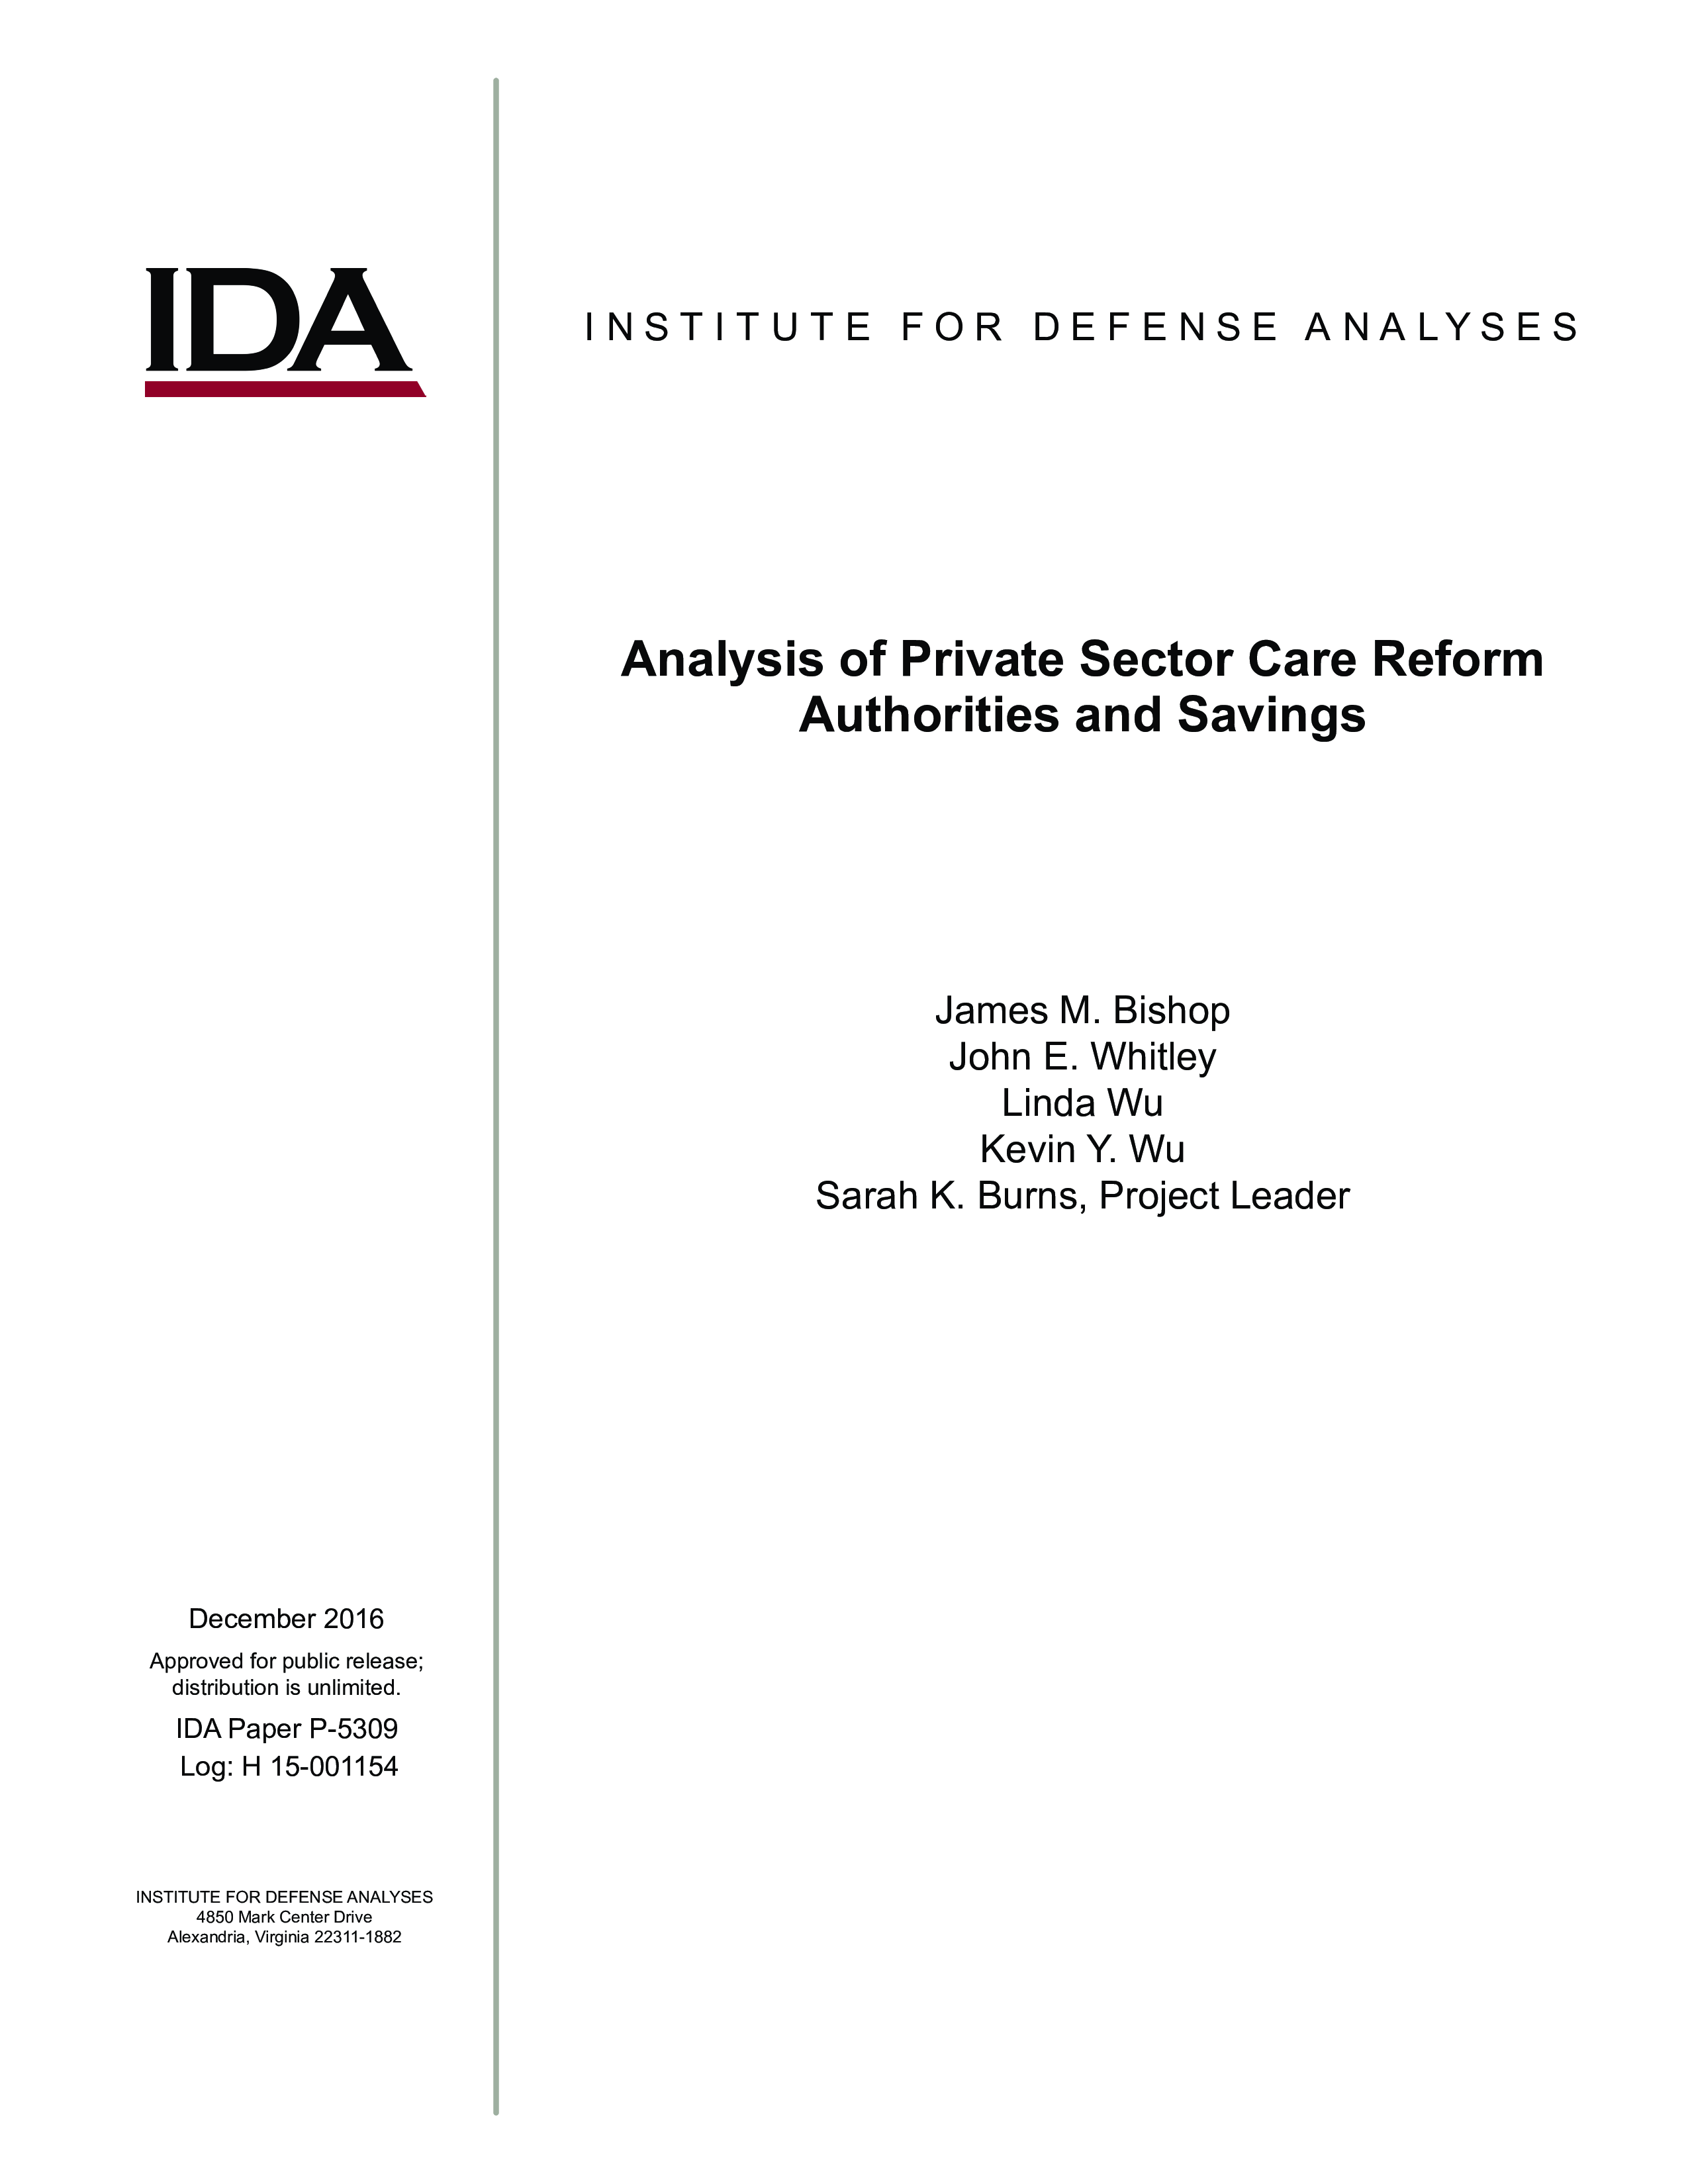 Analysis of Private Sector Care Reform Authorities and Savings